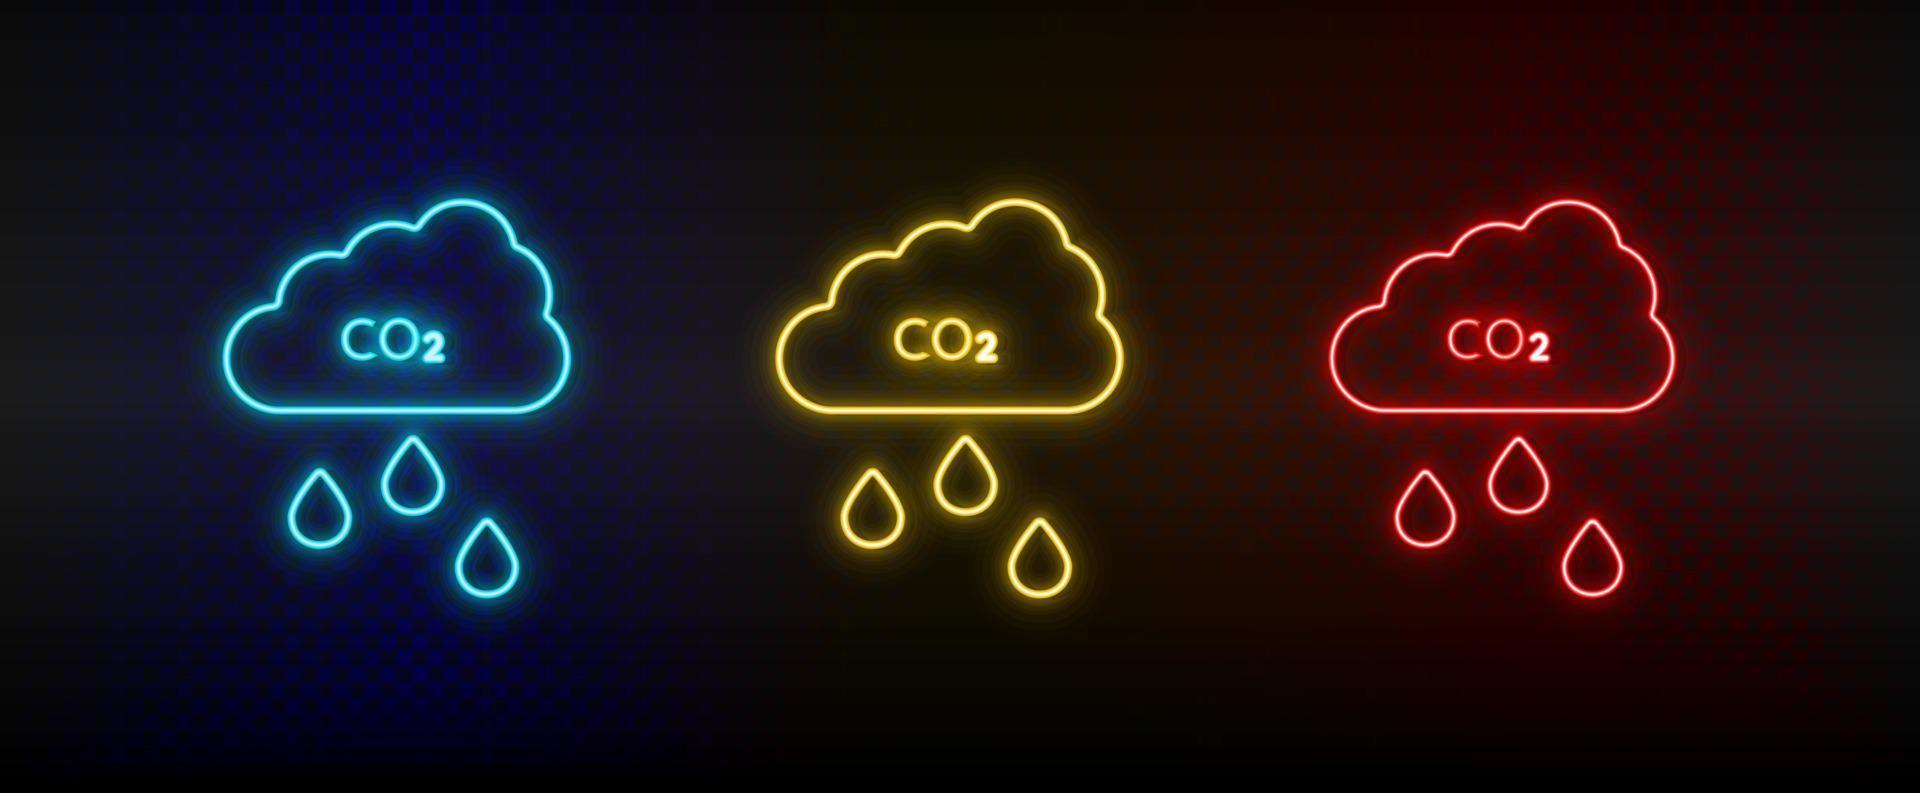 Neon icon set co2, cloud. Set of red, blue, yellow neon vector icon on transparency dark background